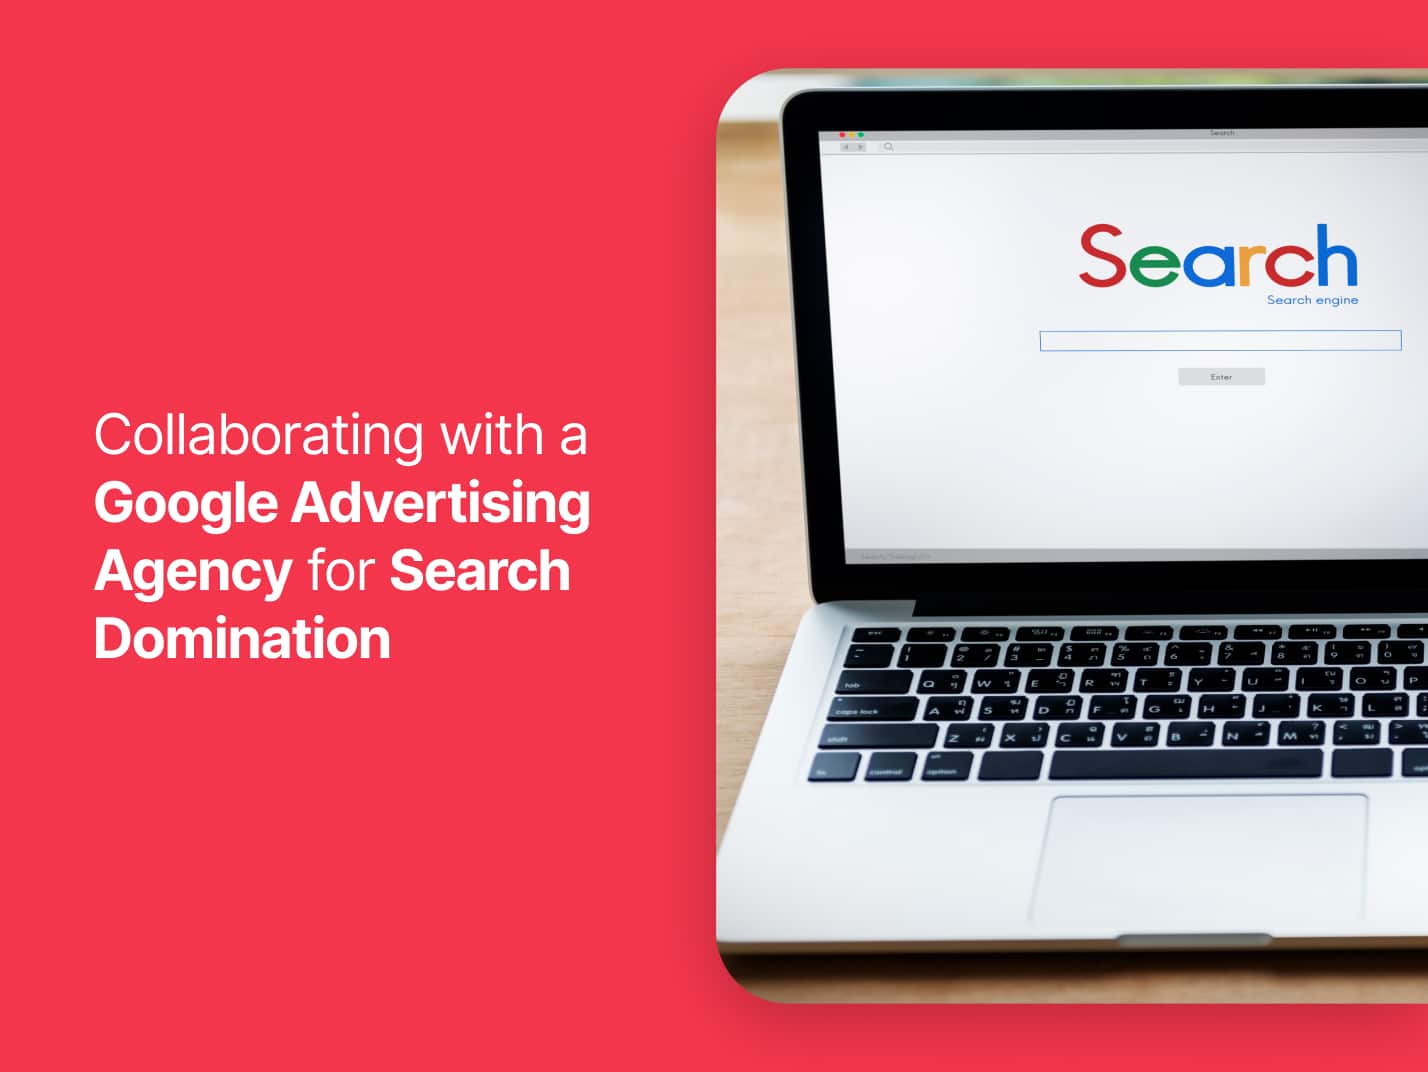 Collaborating with a Google Advertising Agency for Search Domination